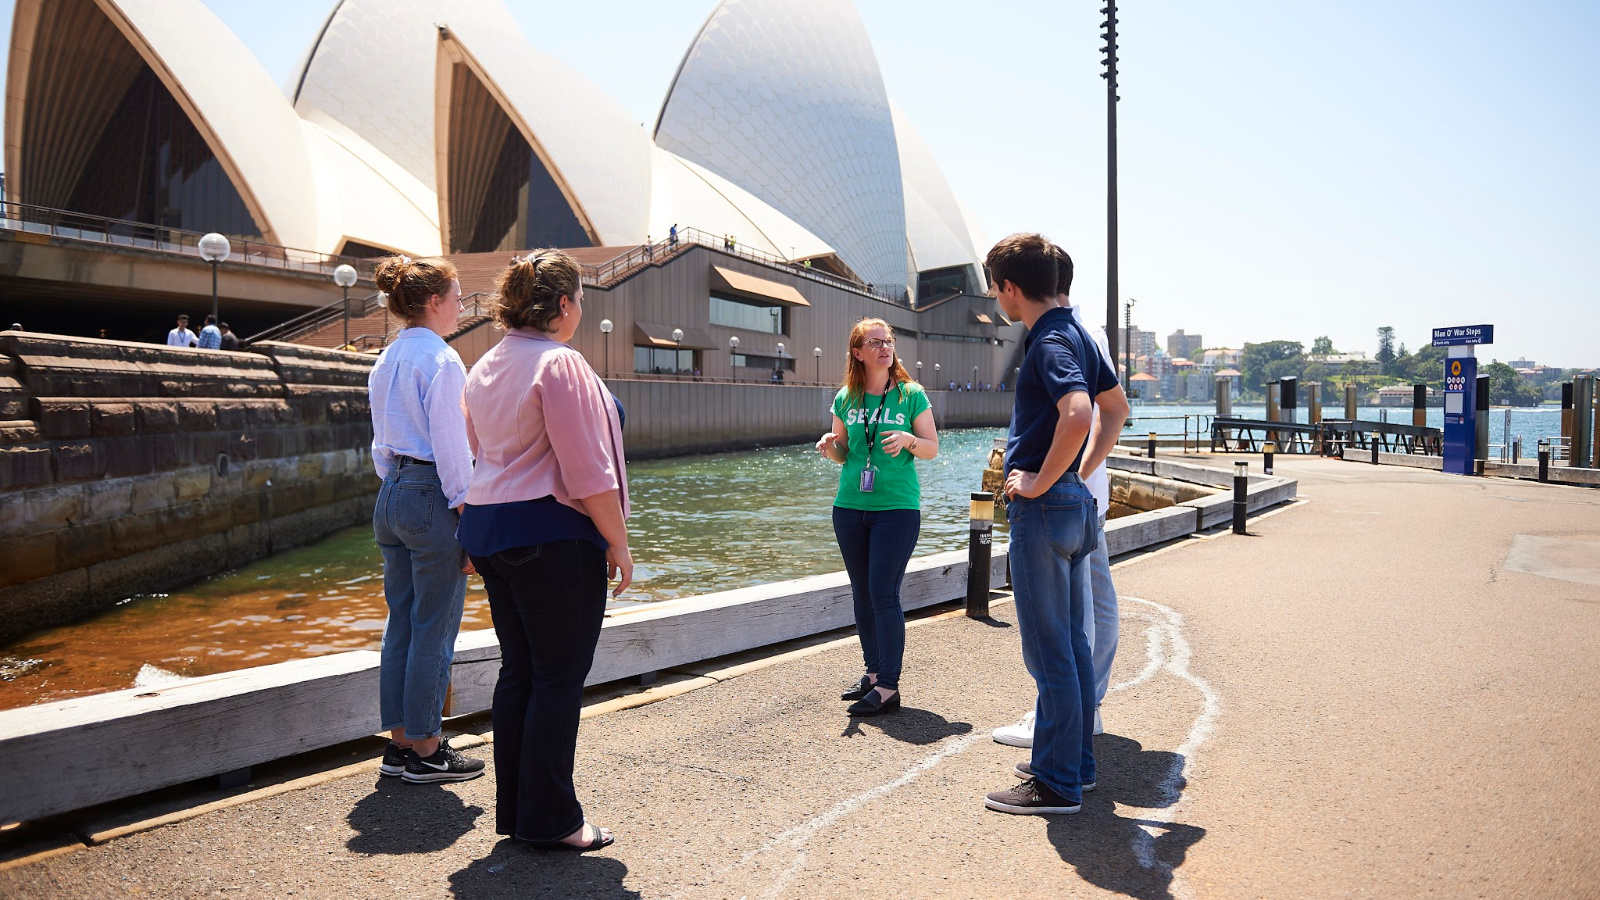 A woman standing outside with four other people, giving a tour of the Sydney Opera House.